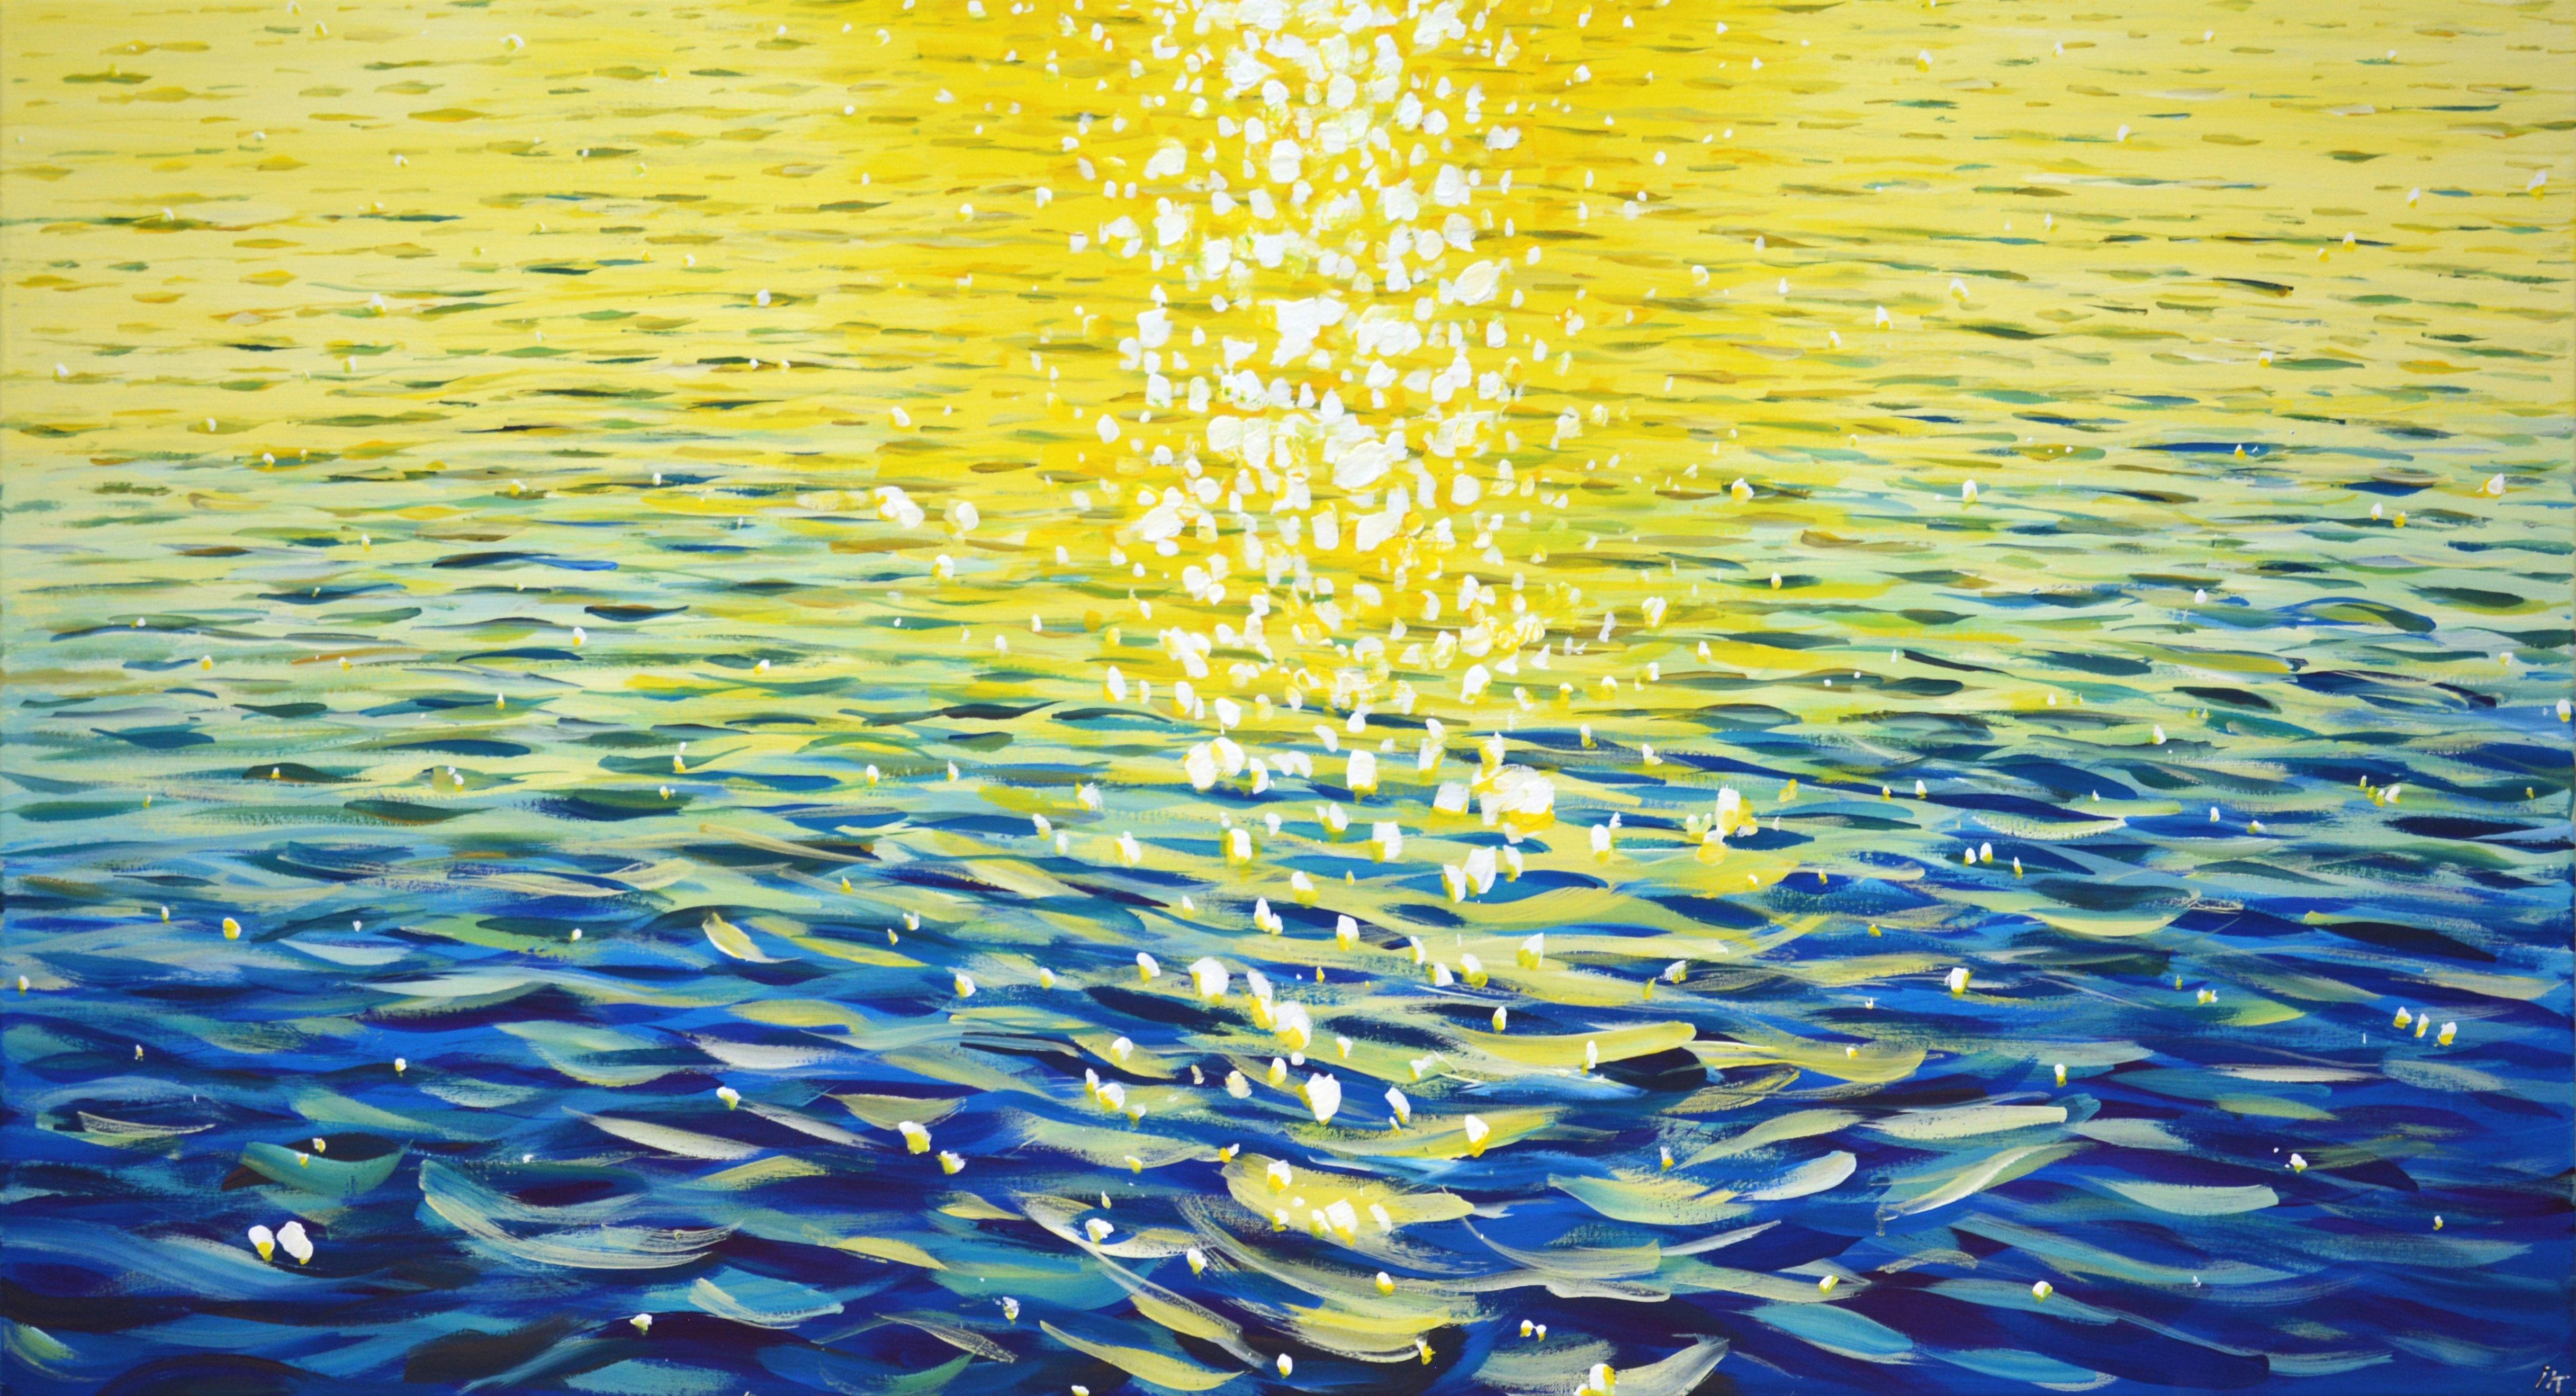 Sun glare on the water. Warm water, waves, serene views, shine of the ocean, evening glare of the sun on the water create an atmosphere of relaxation and romance. Made in the style of realism. A palette of yellow and blue is expressively mixed on